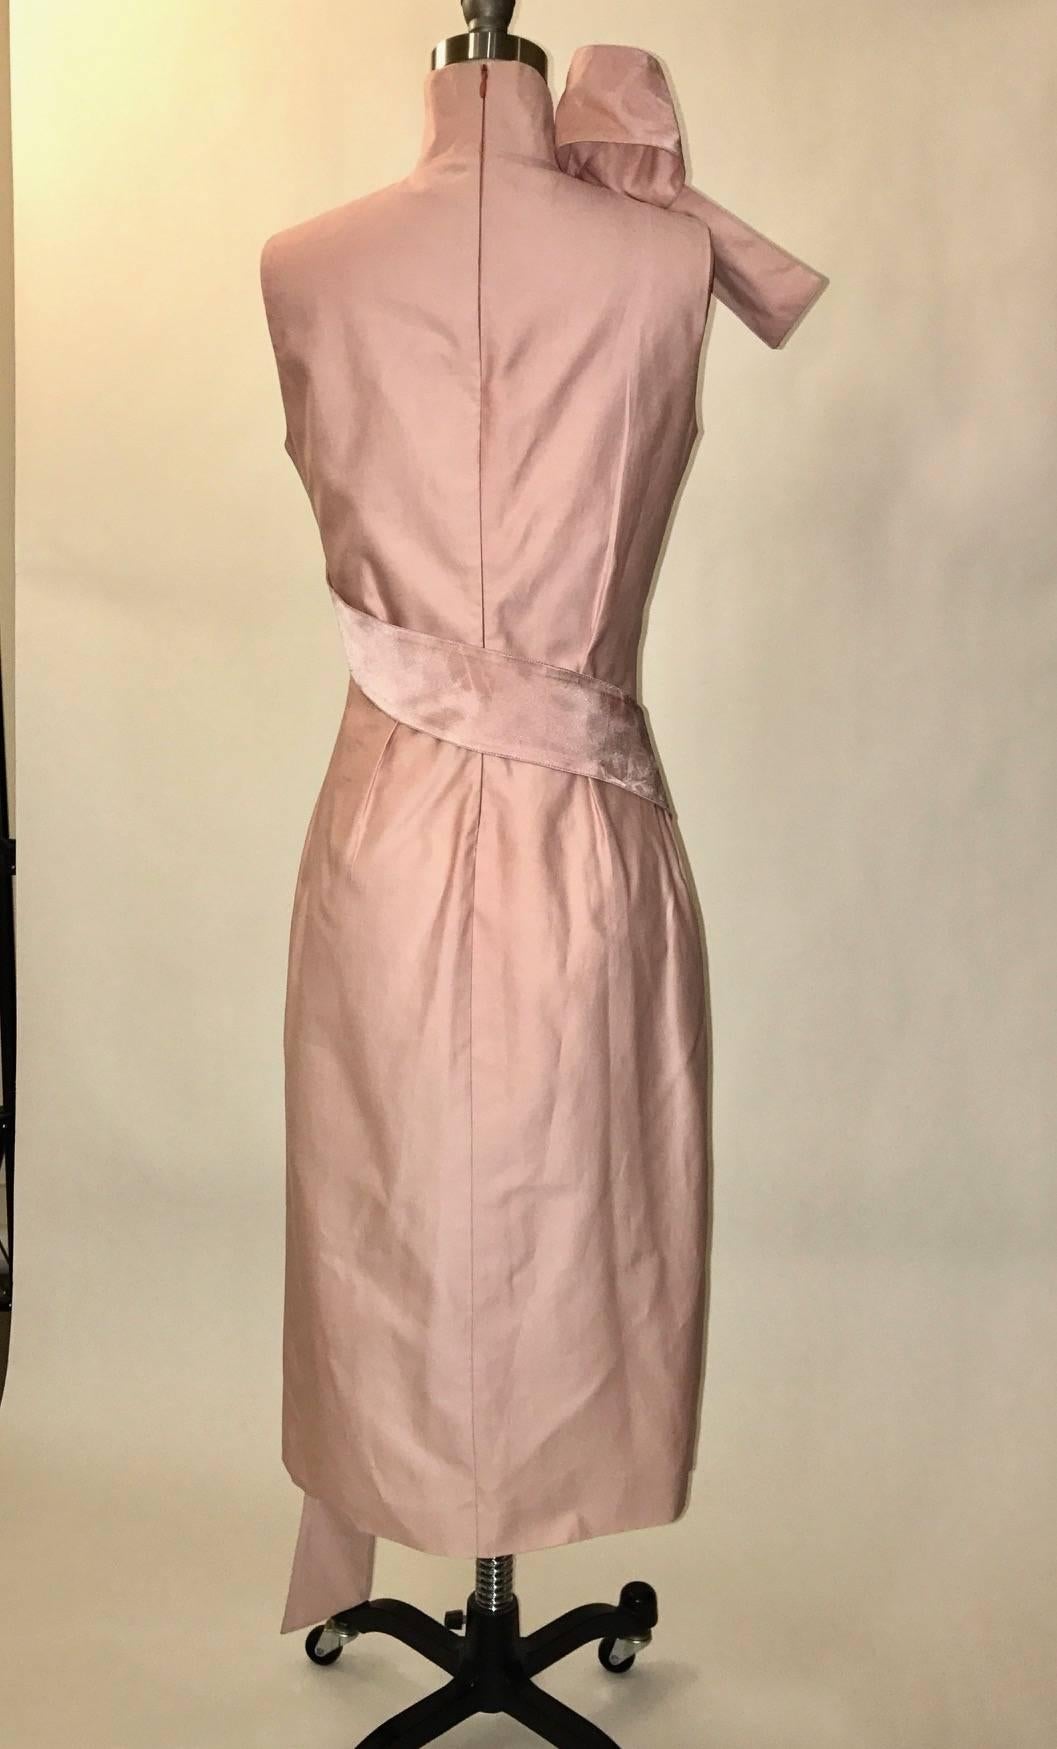 Alexander McQueen pink dress from his acclaimed Spring Summer 2001 Voss collection. High neck, very fitted style with a pink ribbon wrapping around the body and ending in a sculptural loop at neck. Back zip.

73% cotton, 23% silk.
Fully lined in